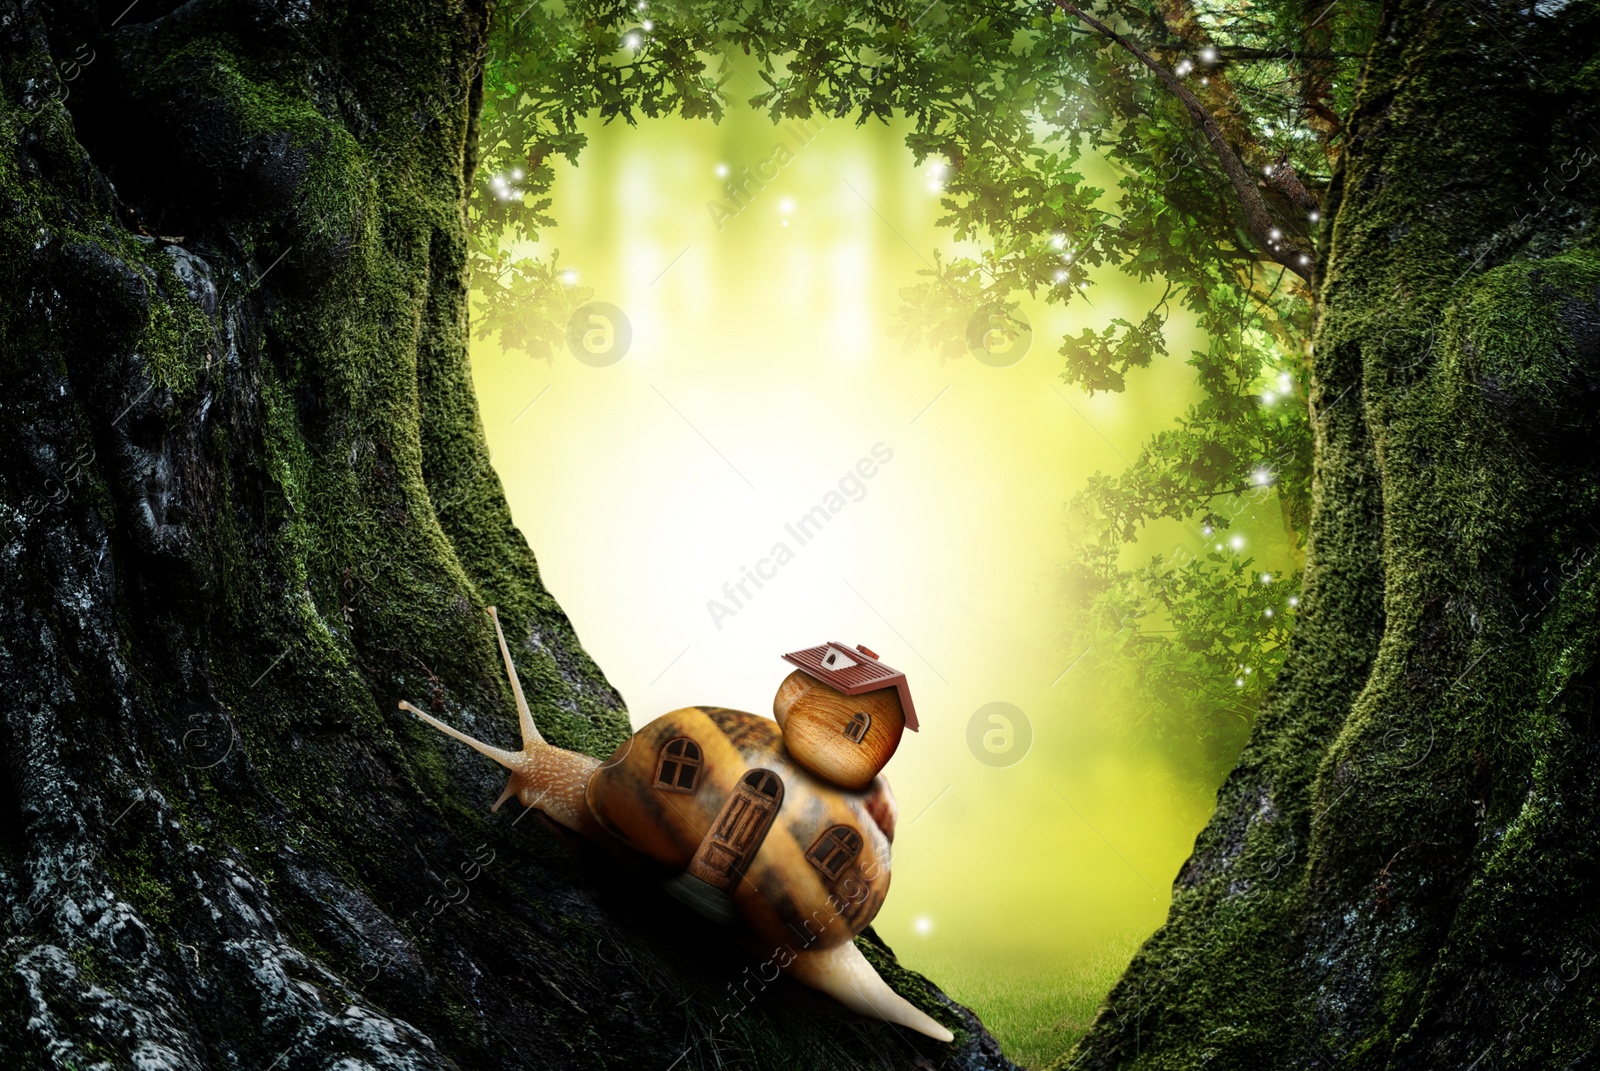 Image of Fantasy world. Magic snail with its shell house moving on tree in beautiful fairy forest